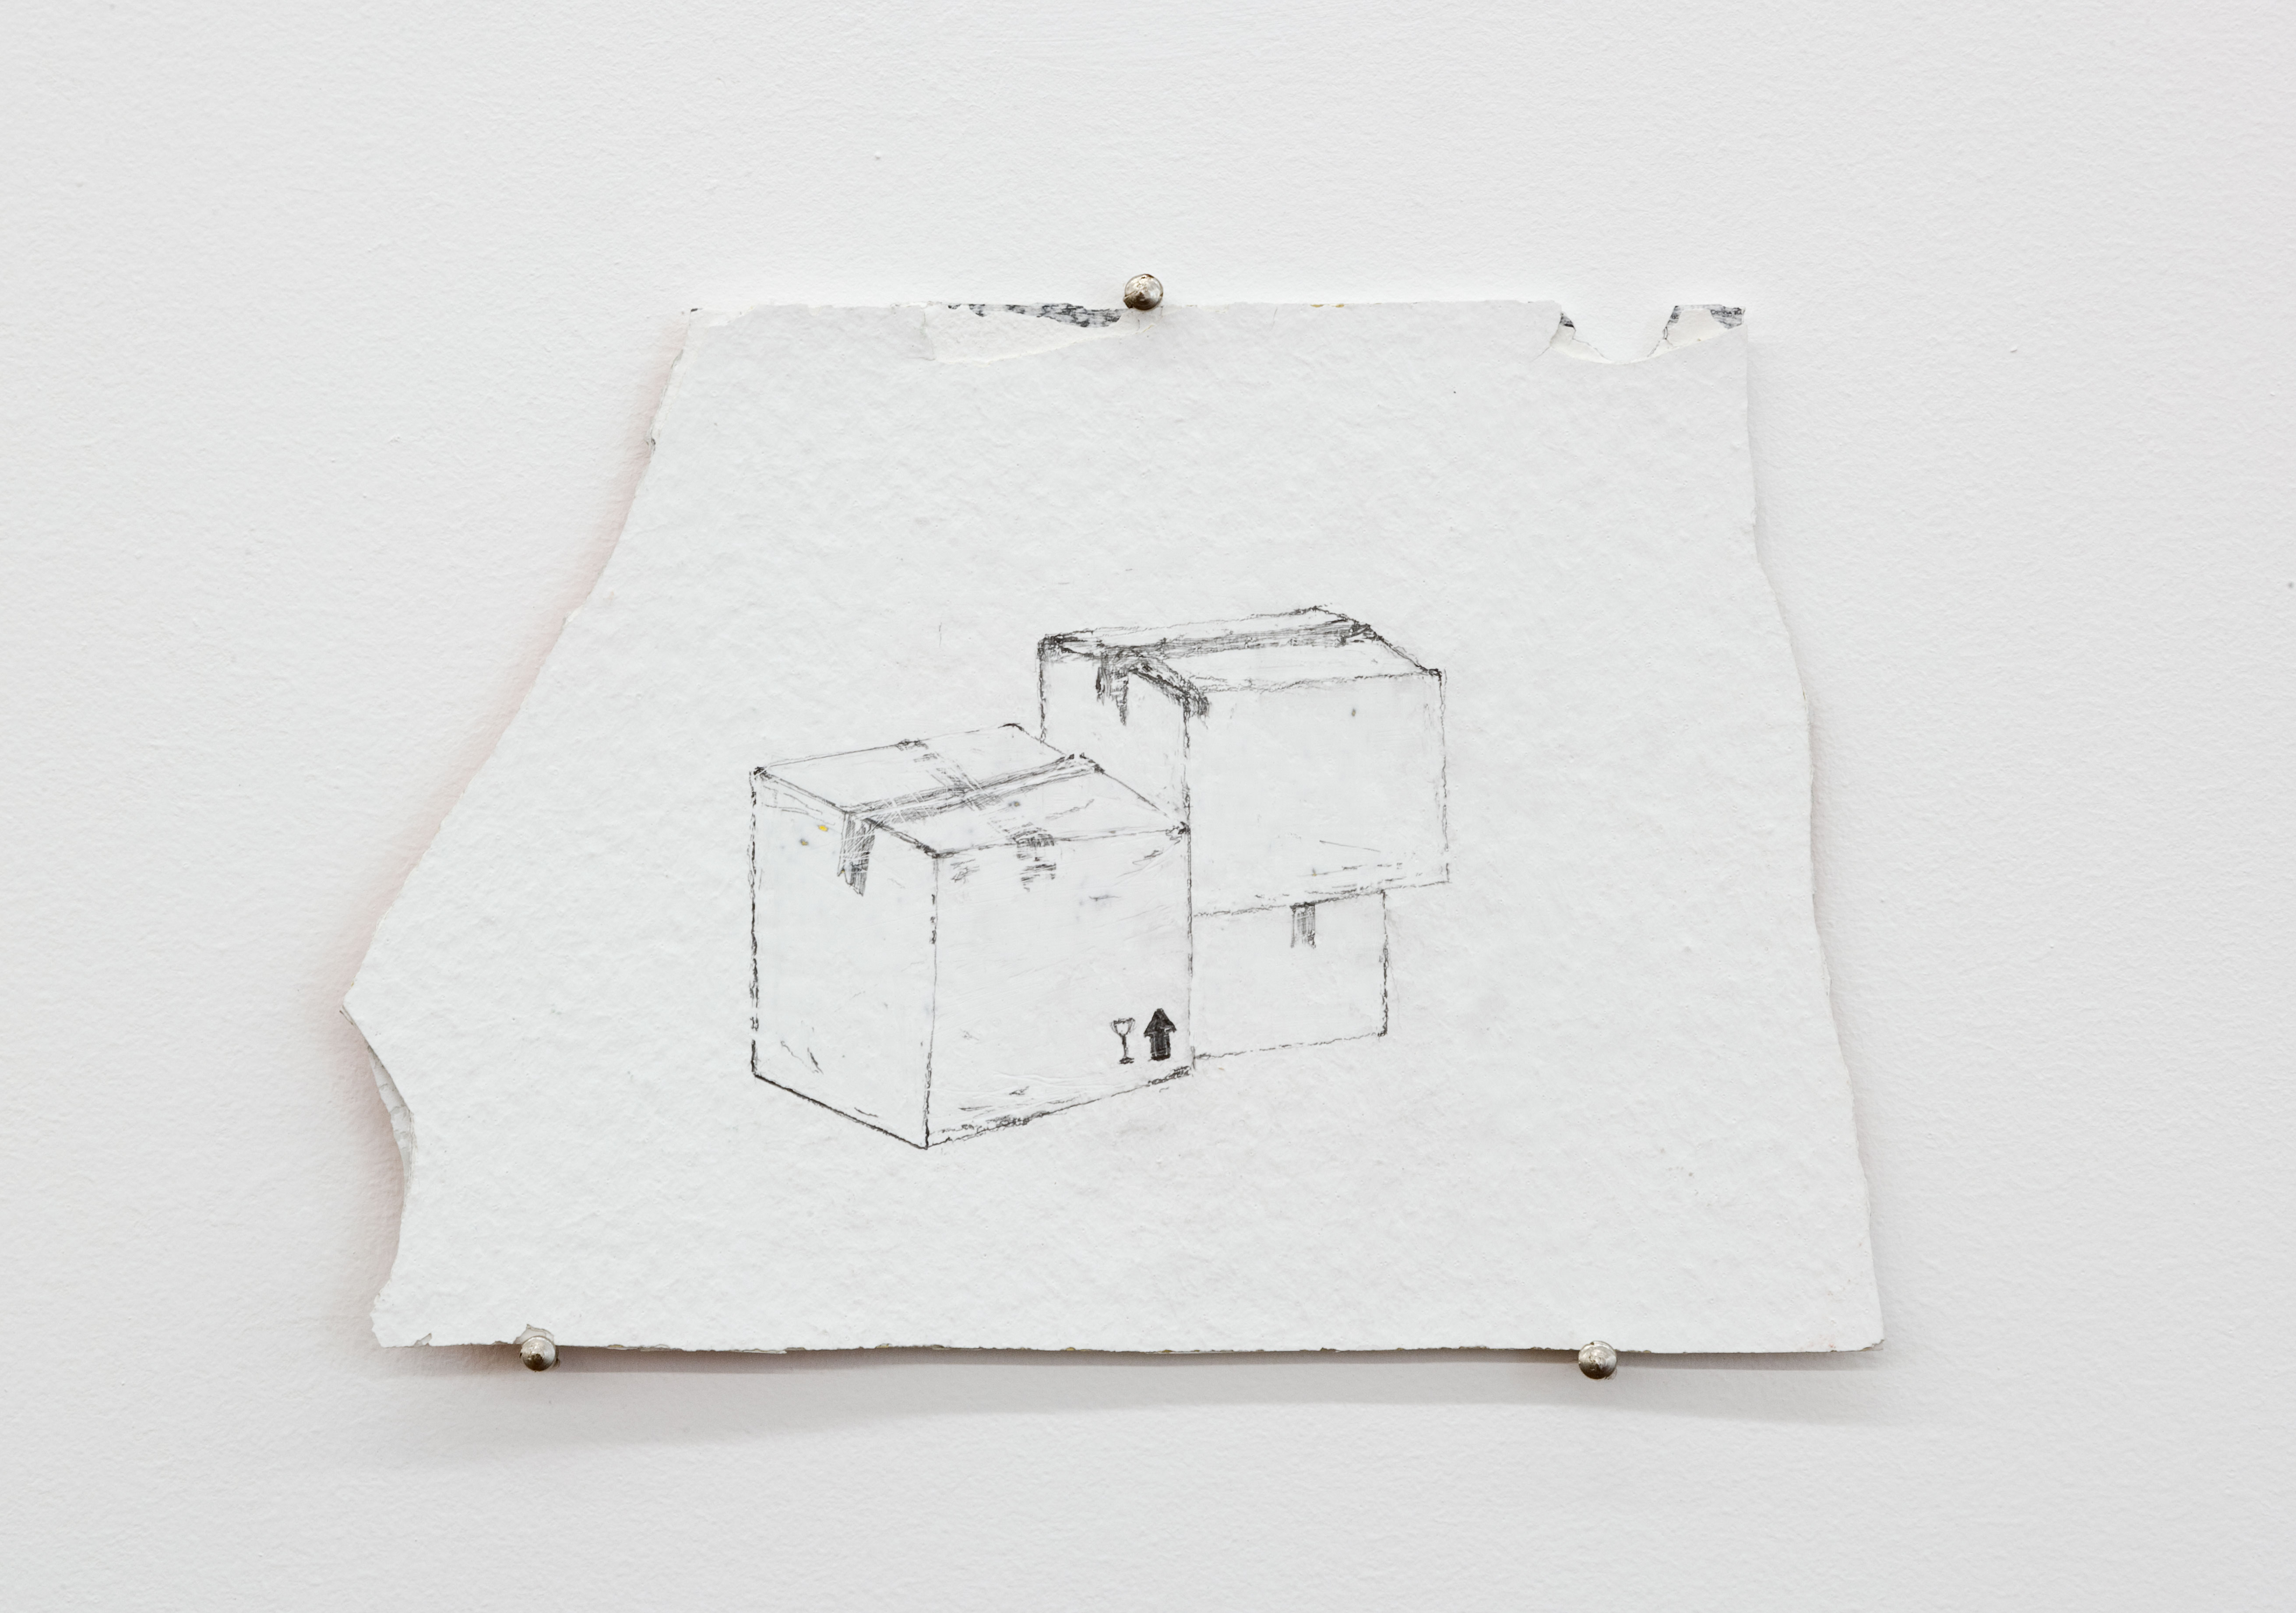 Untitled (Boxes) from the series Bases efêmeras